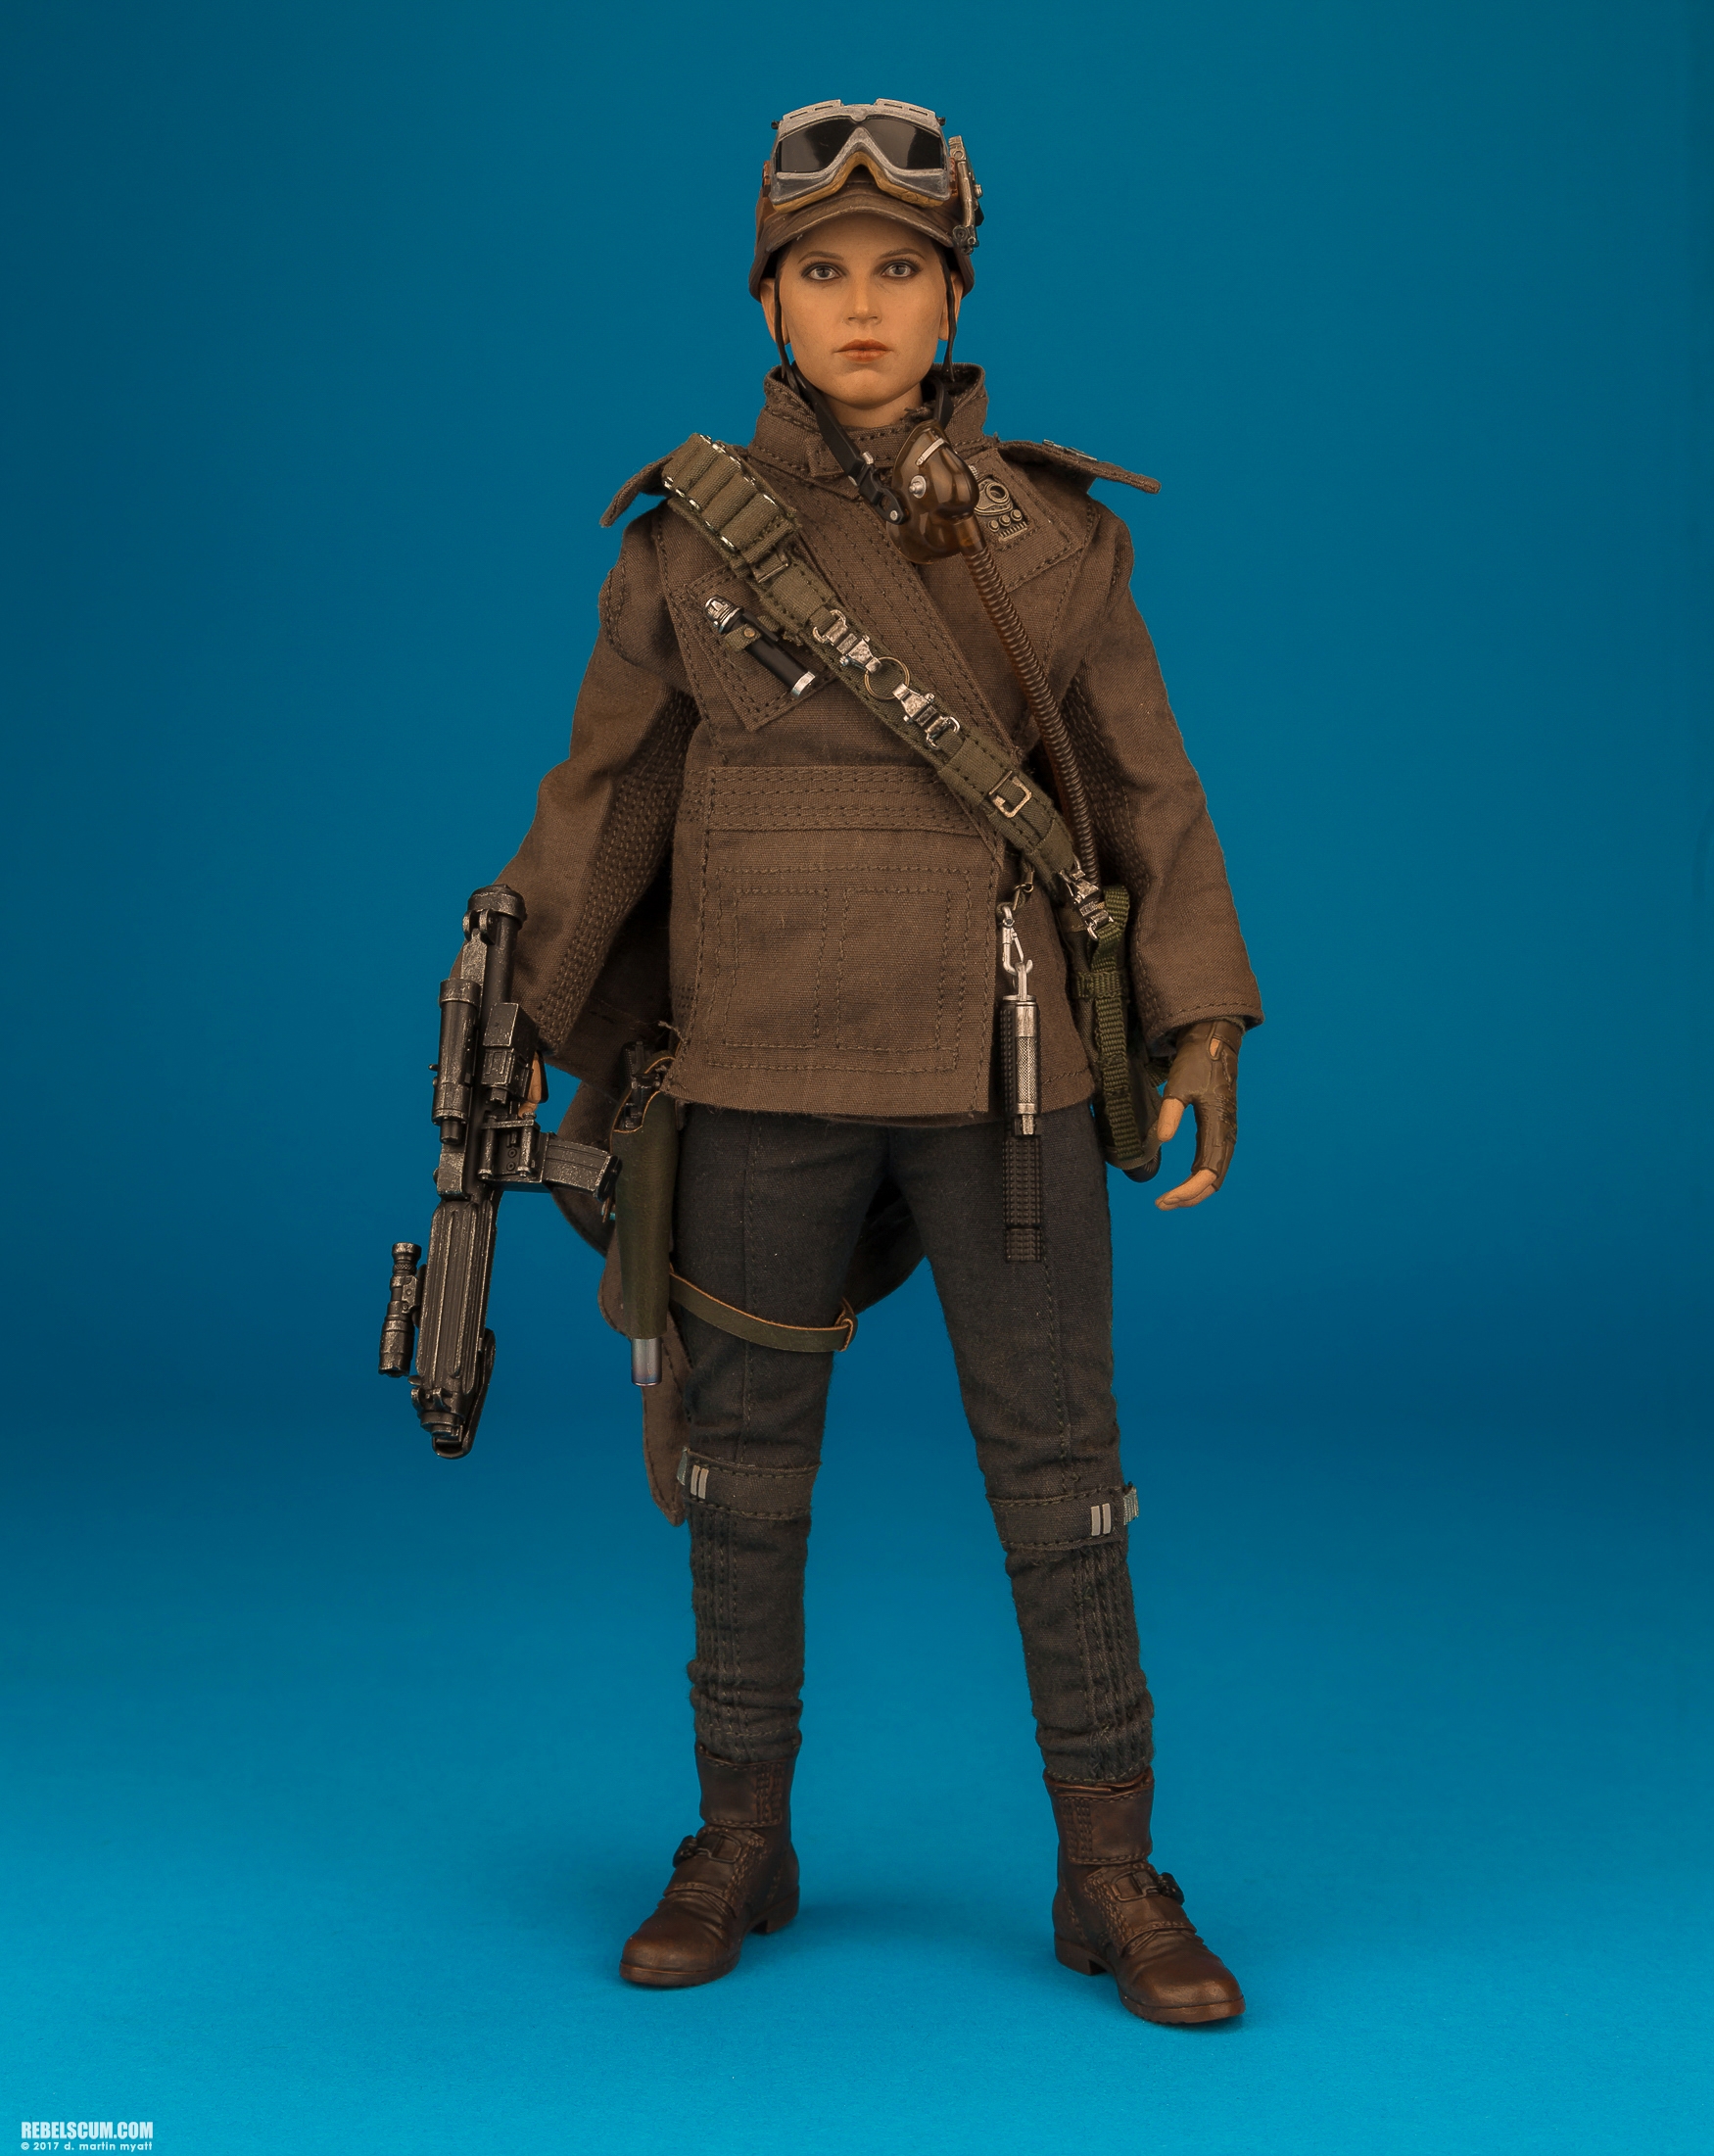 MMS405-Jyn-Erso-Deluxe-Star-Wars-Rogue-One-Hot-Toys-021.jpg